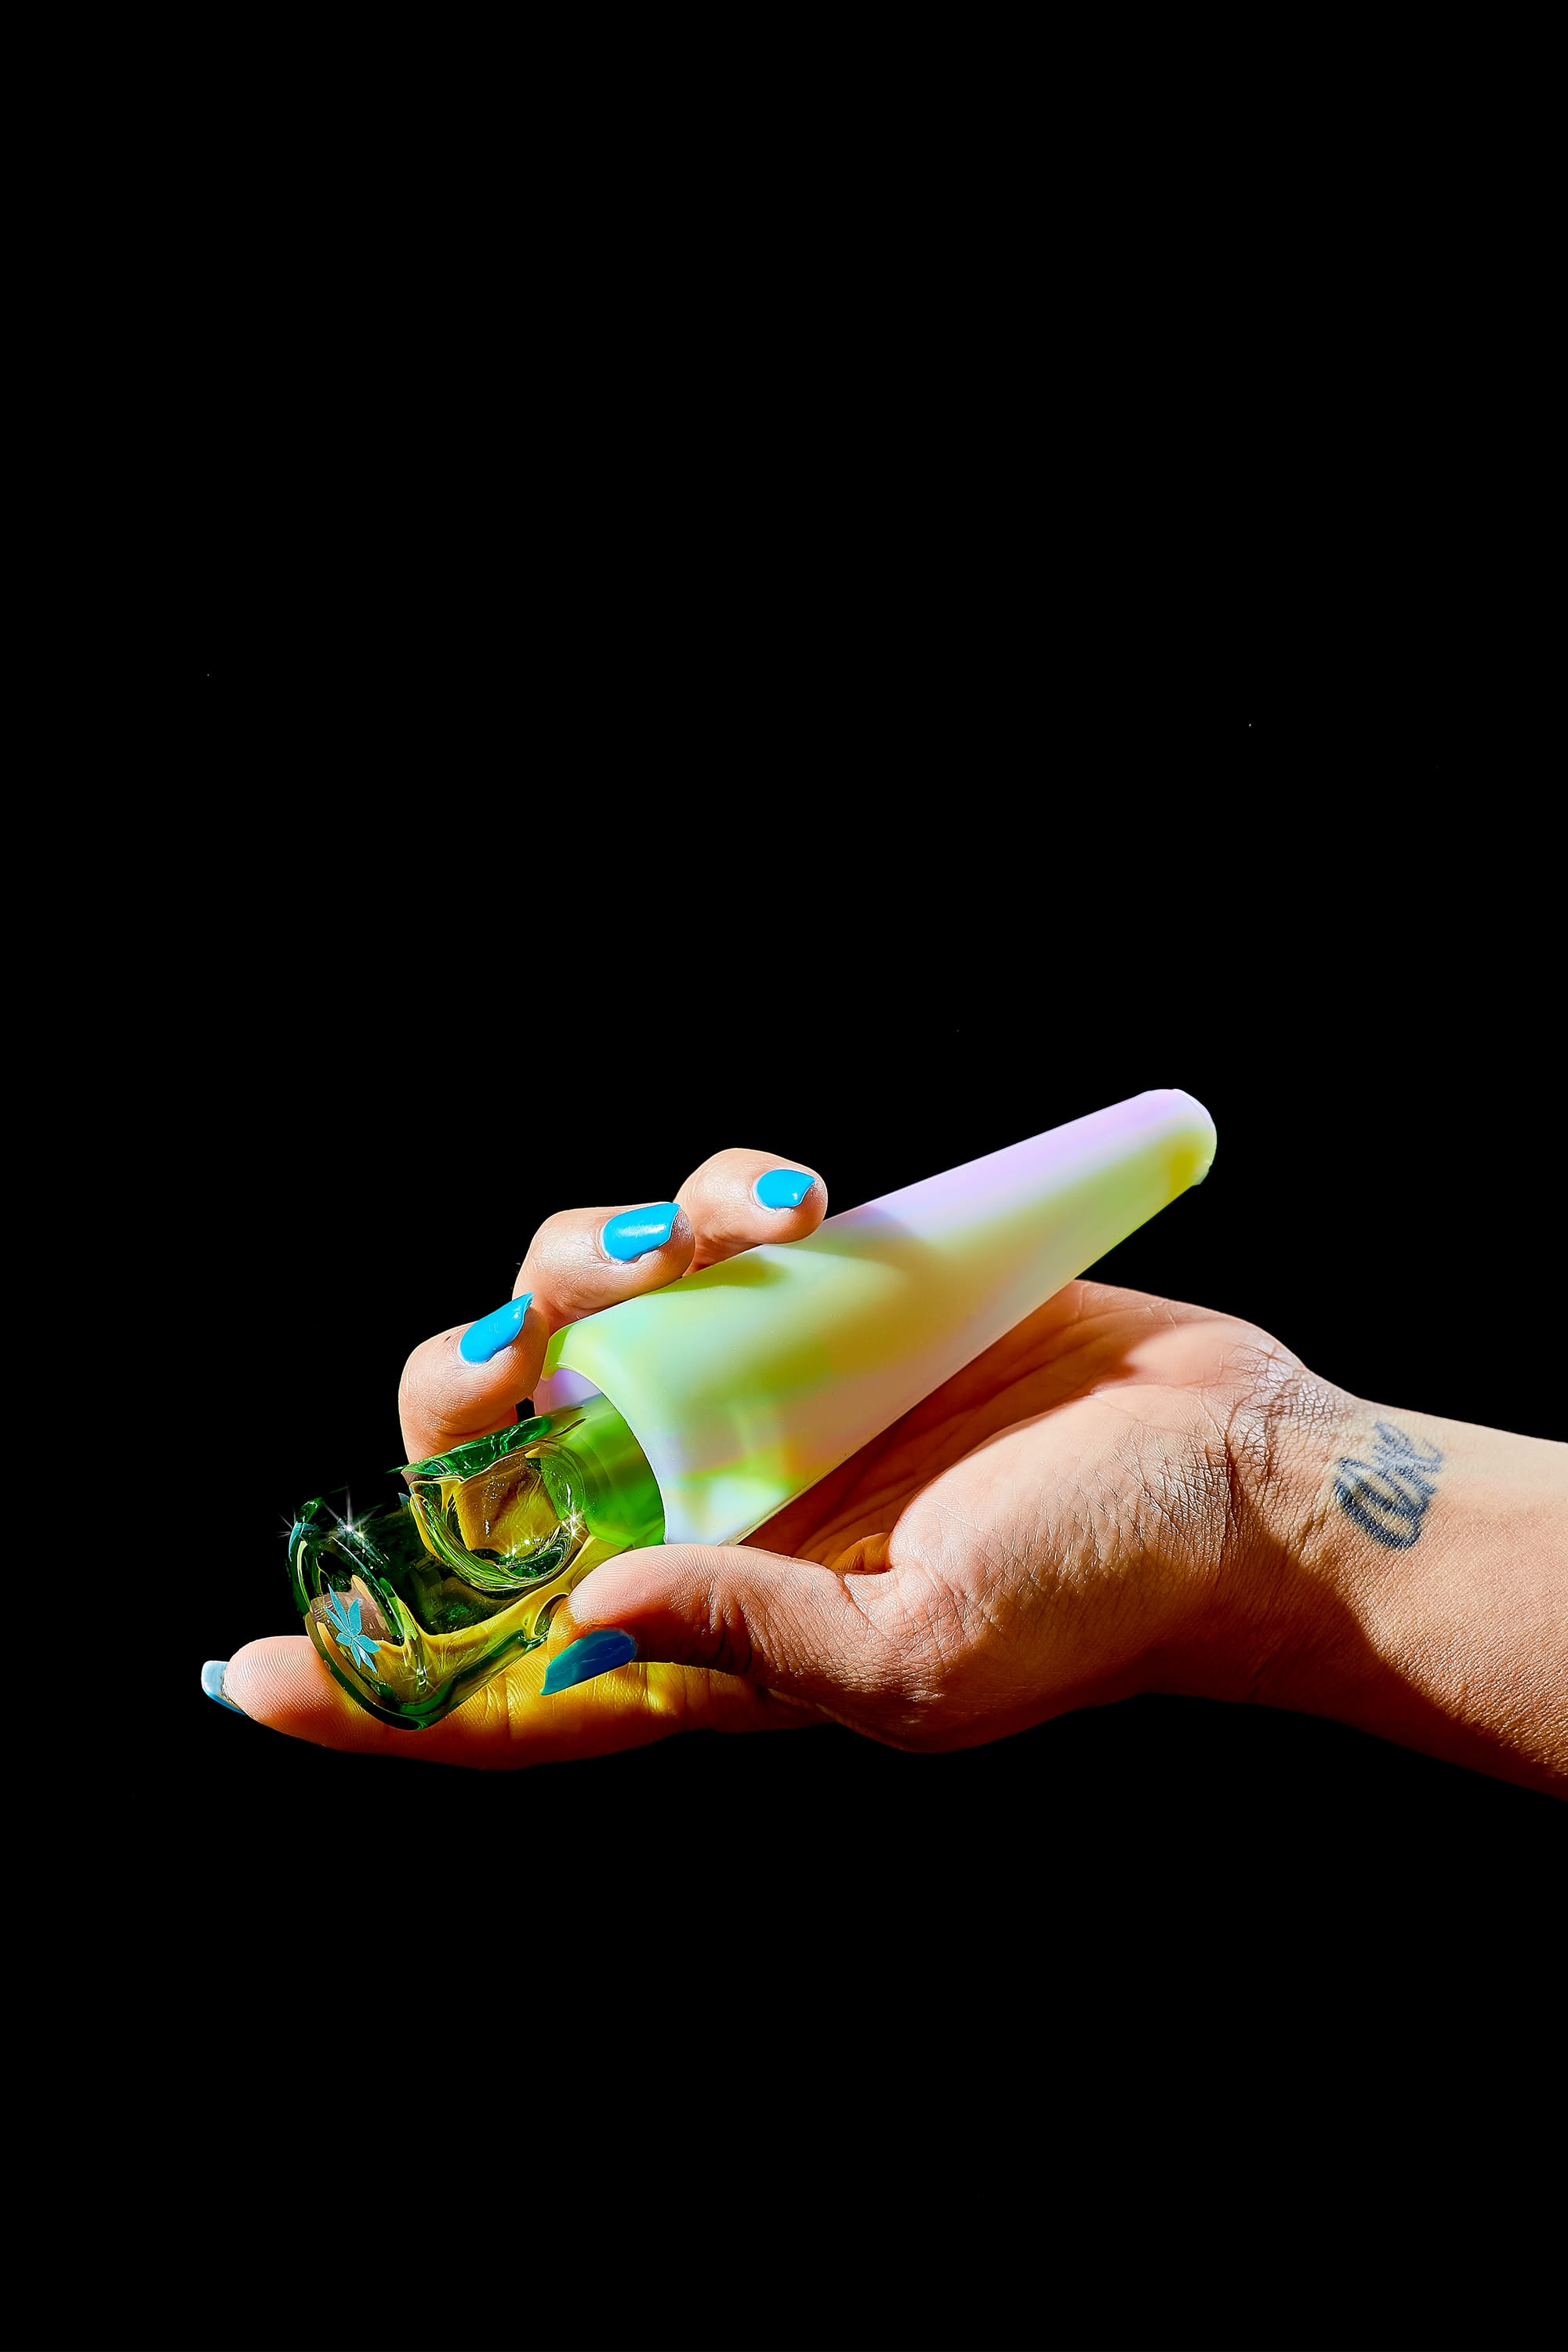 a green glass, glow-in-the-dark glass bong by session goods on a black background